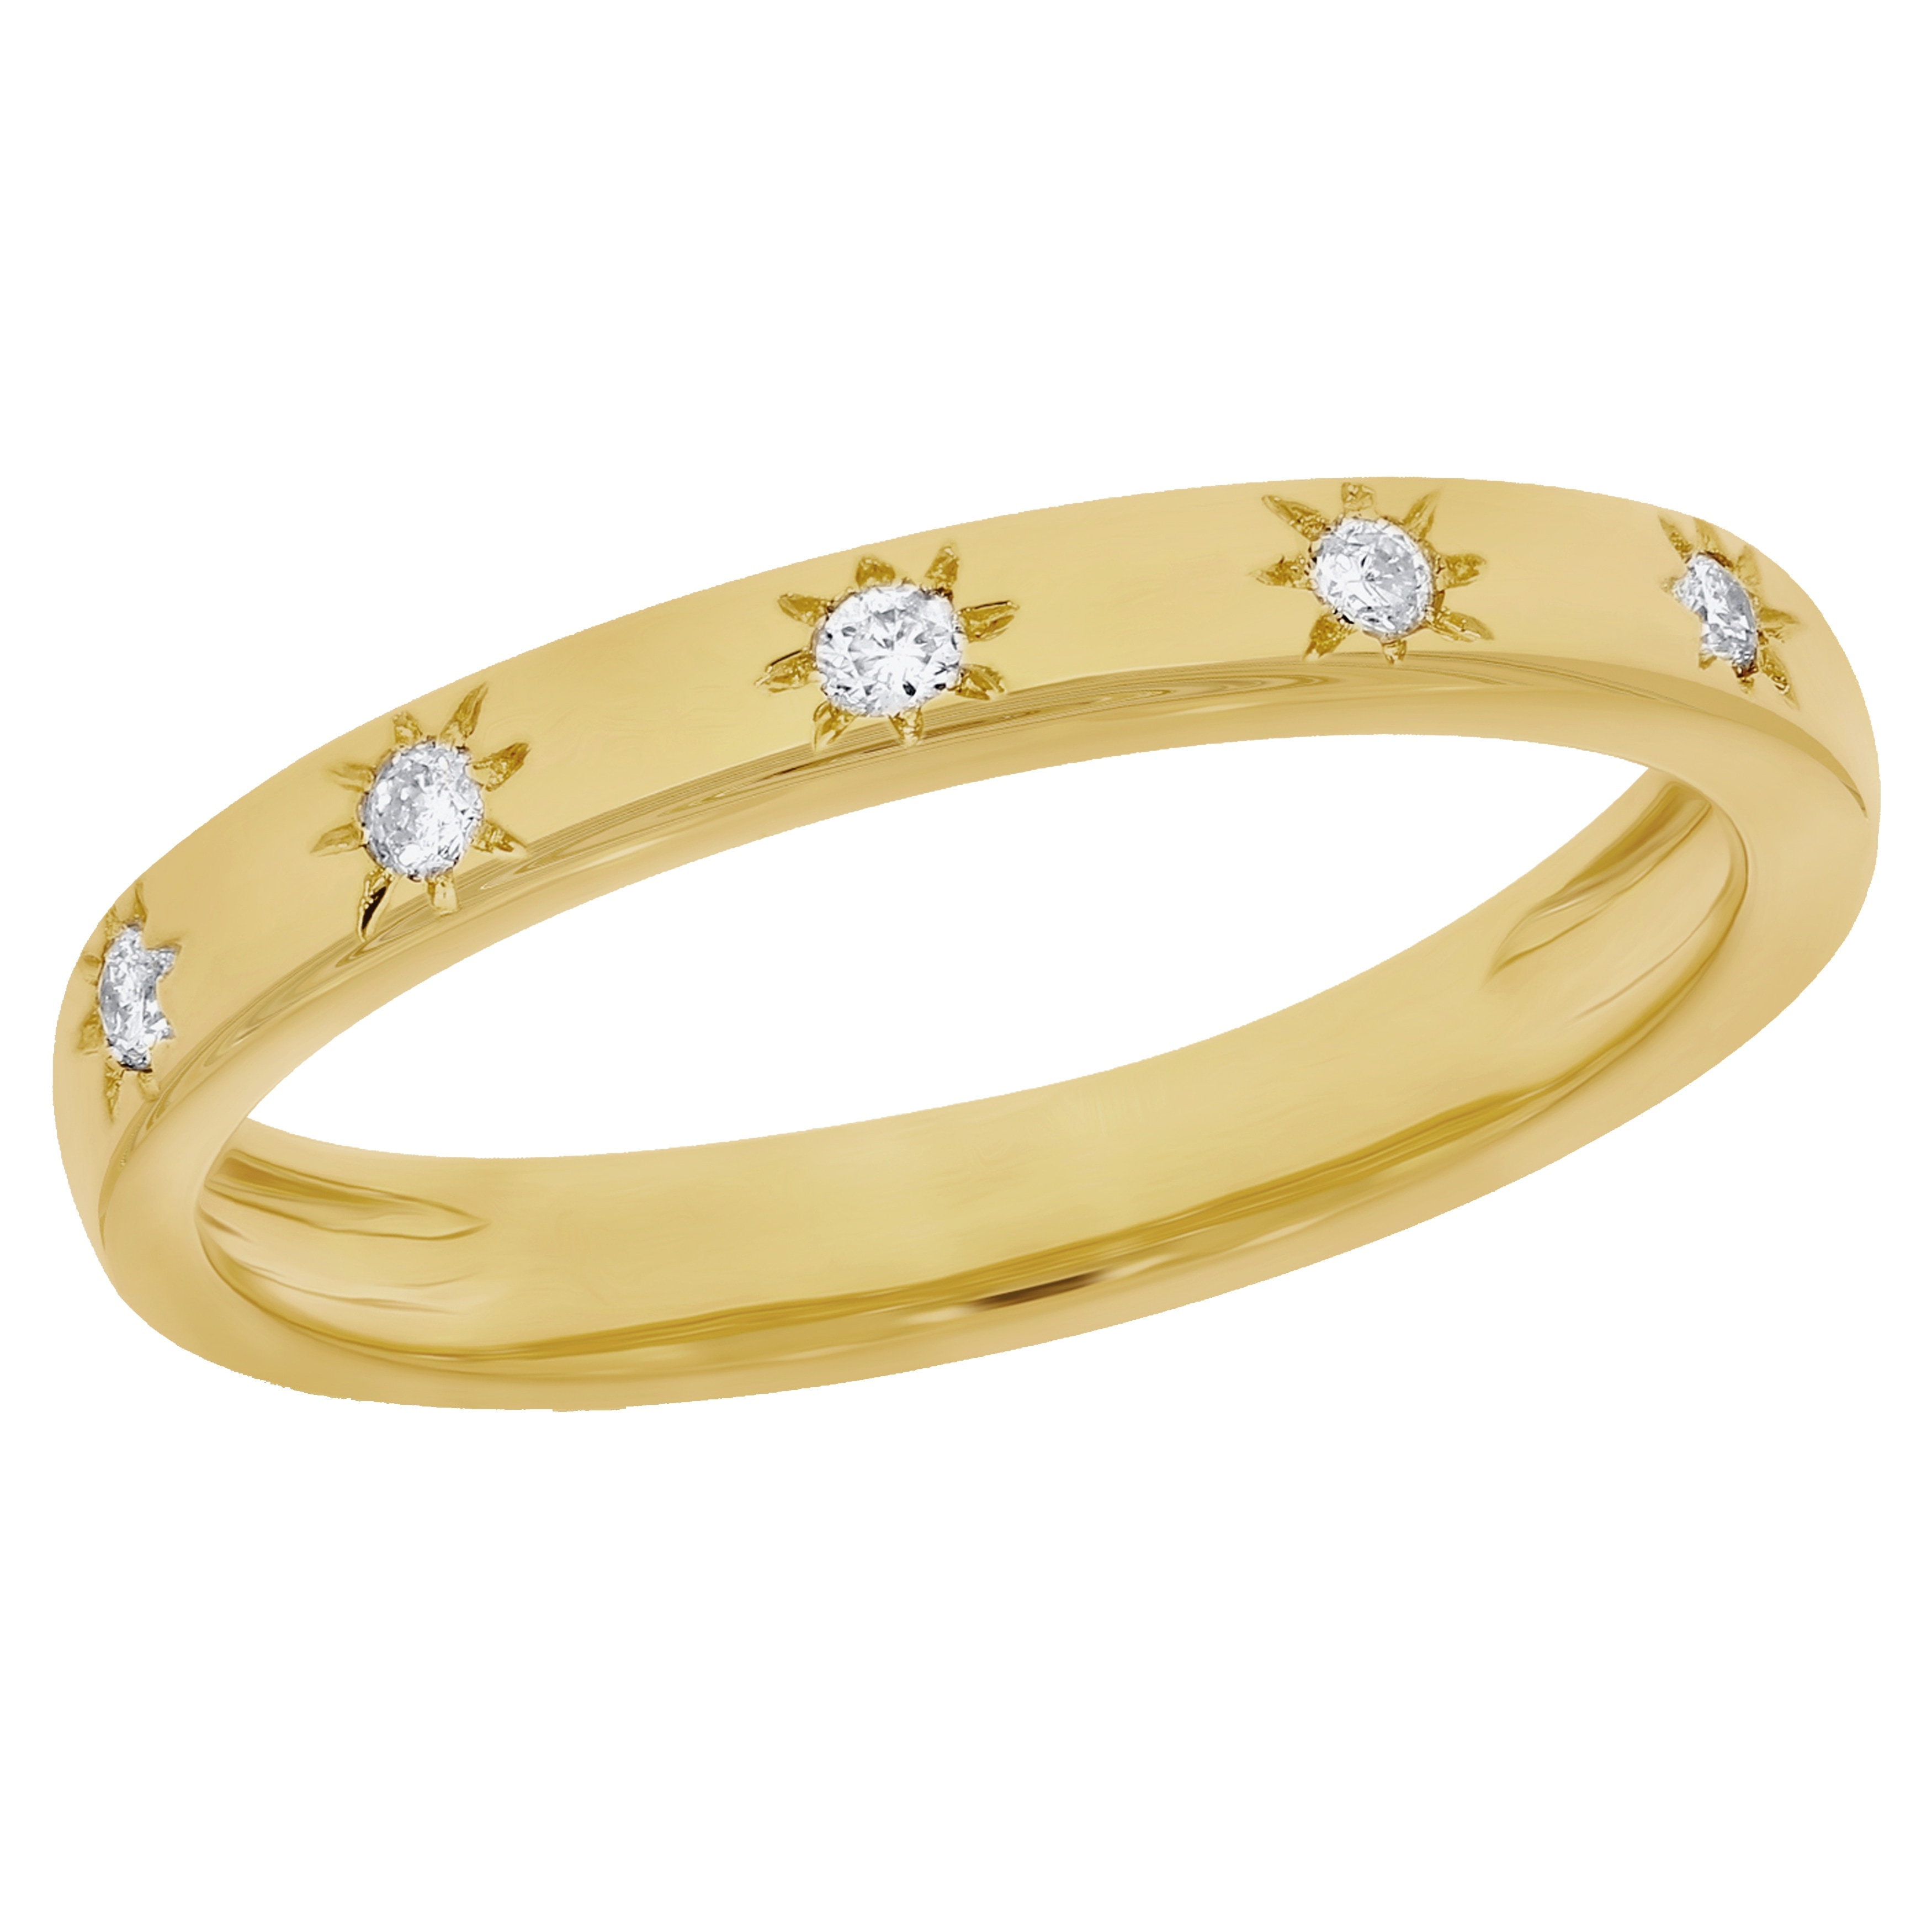 Size-8 G-H,I2-I3 1/10 cttw, Diamond Wedding Band in 10K Yellow Gold